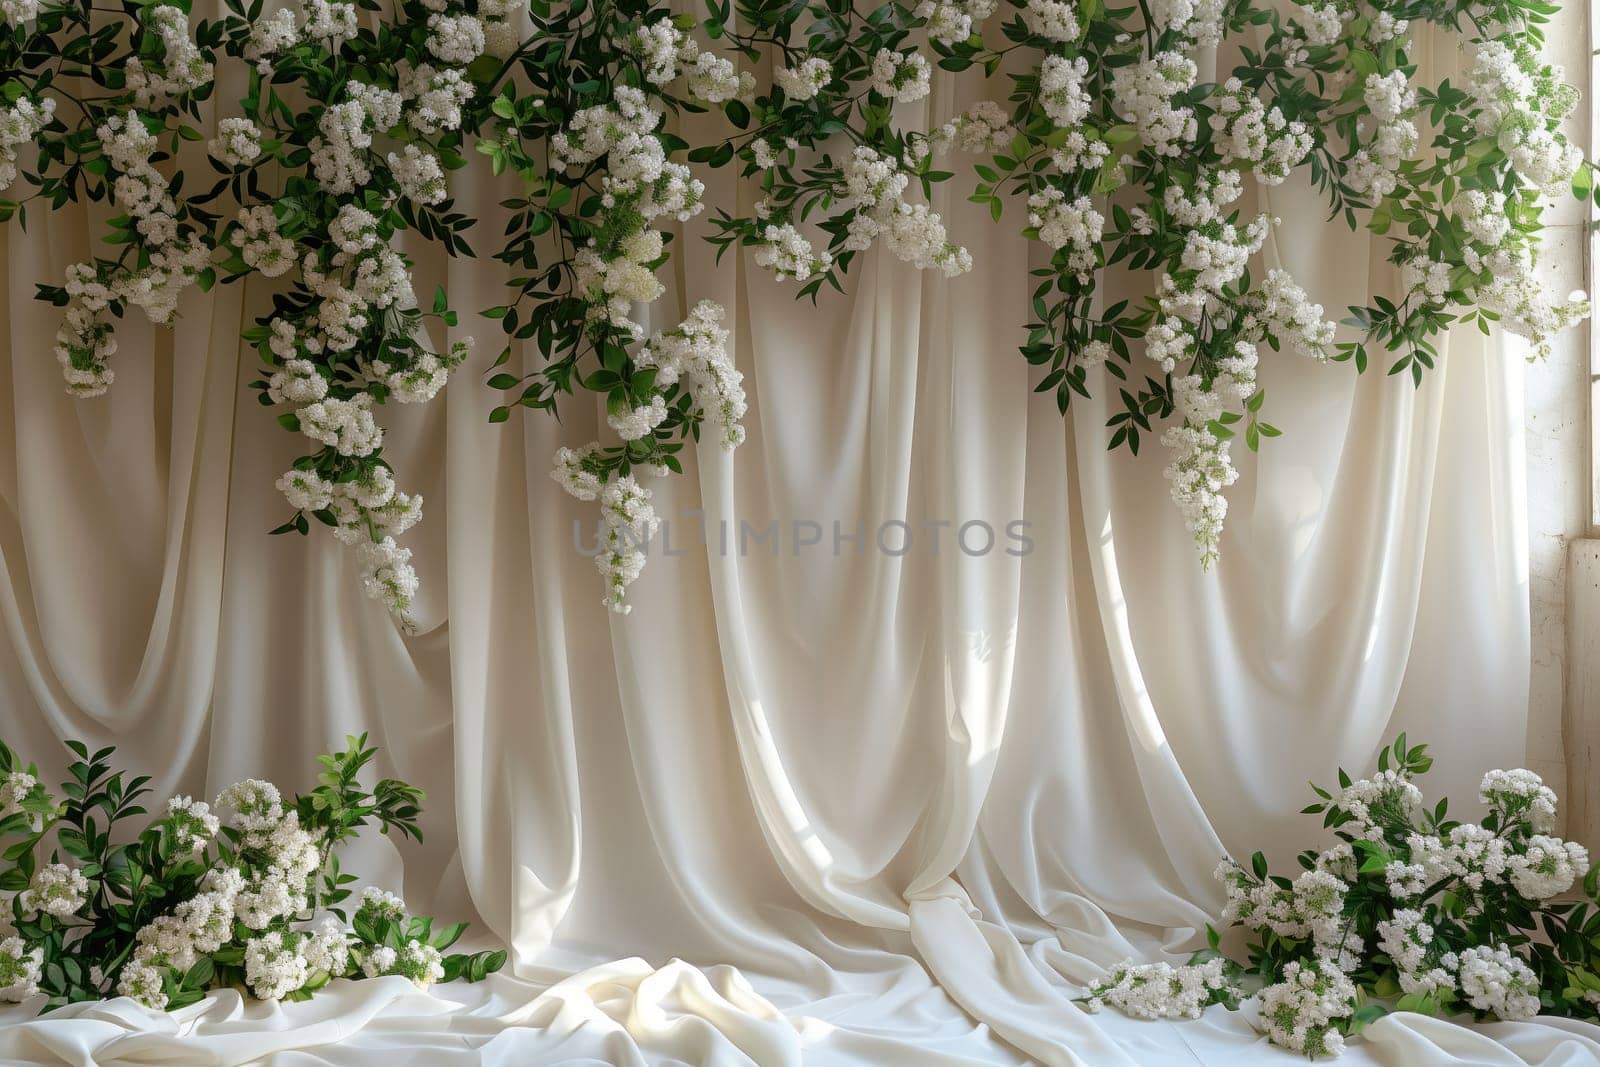 An elegant white curtain adorned with white flowers and green leaves, creating a stunning landscape for a wedding ceremony or event. Perfect for flower arranging or as a wedding ceremony supply